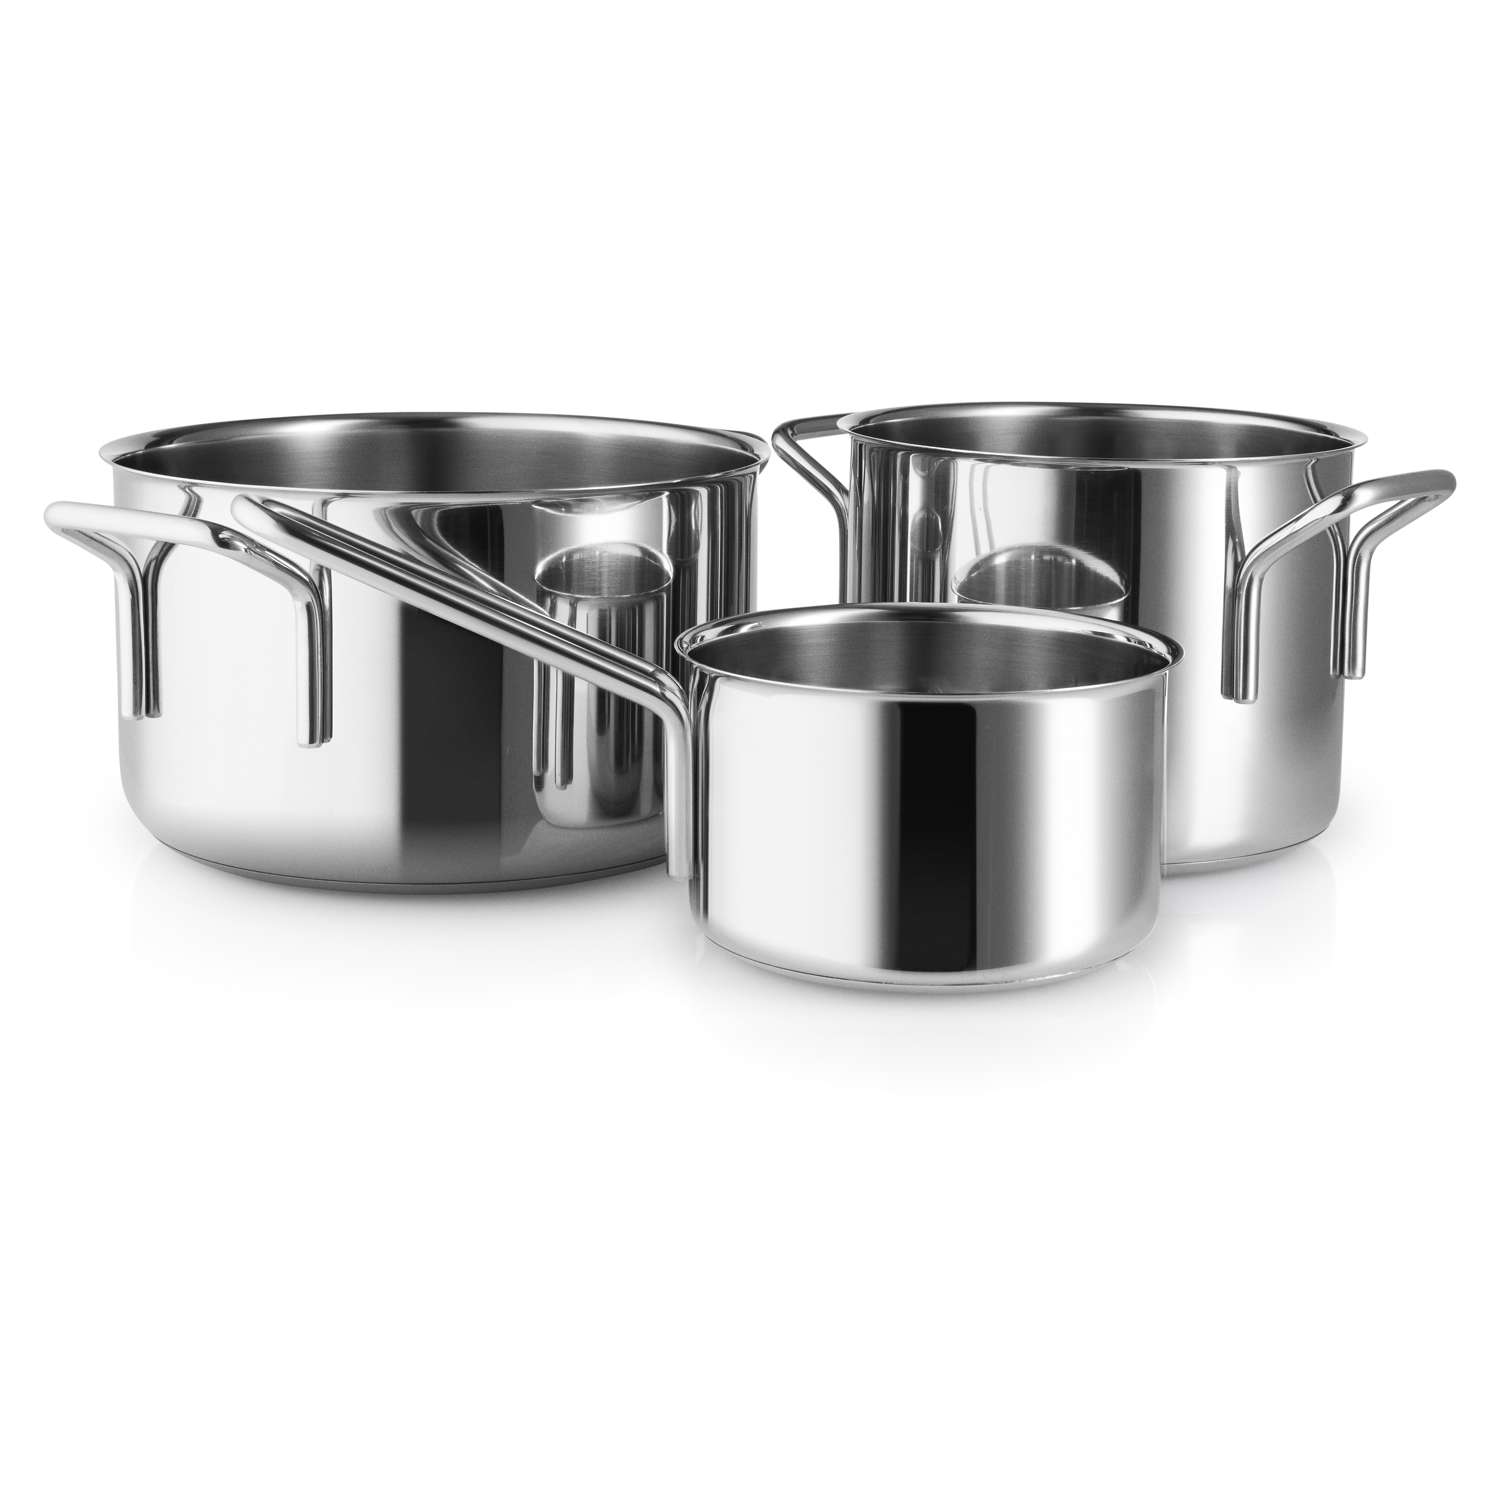 https://www.evasolo.com/%2FFiles%2FImages%2FPlytix%2FProduct_Photo_1%2F94202411_Stainless_steel_Collection_box_3_items_HIGH.jpg